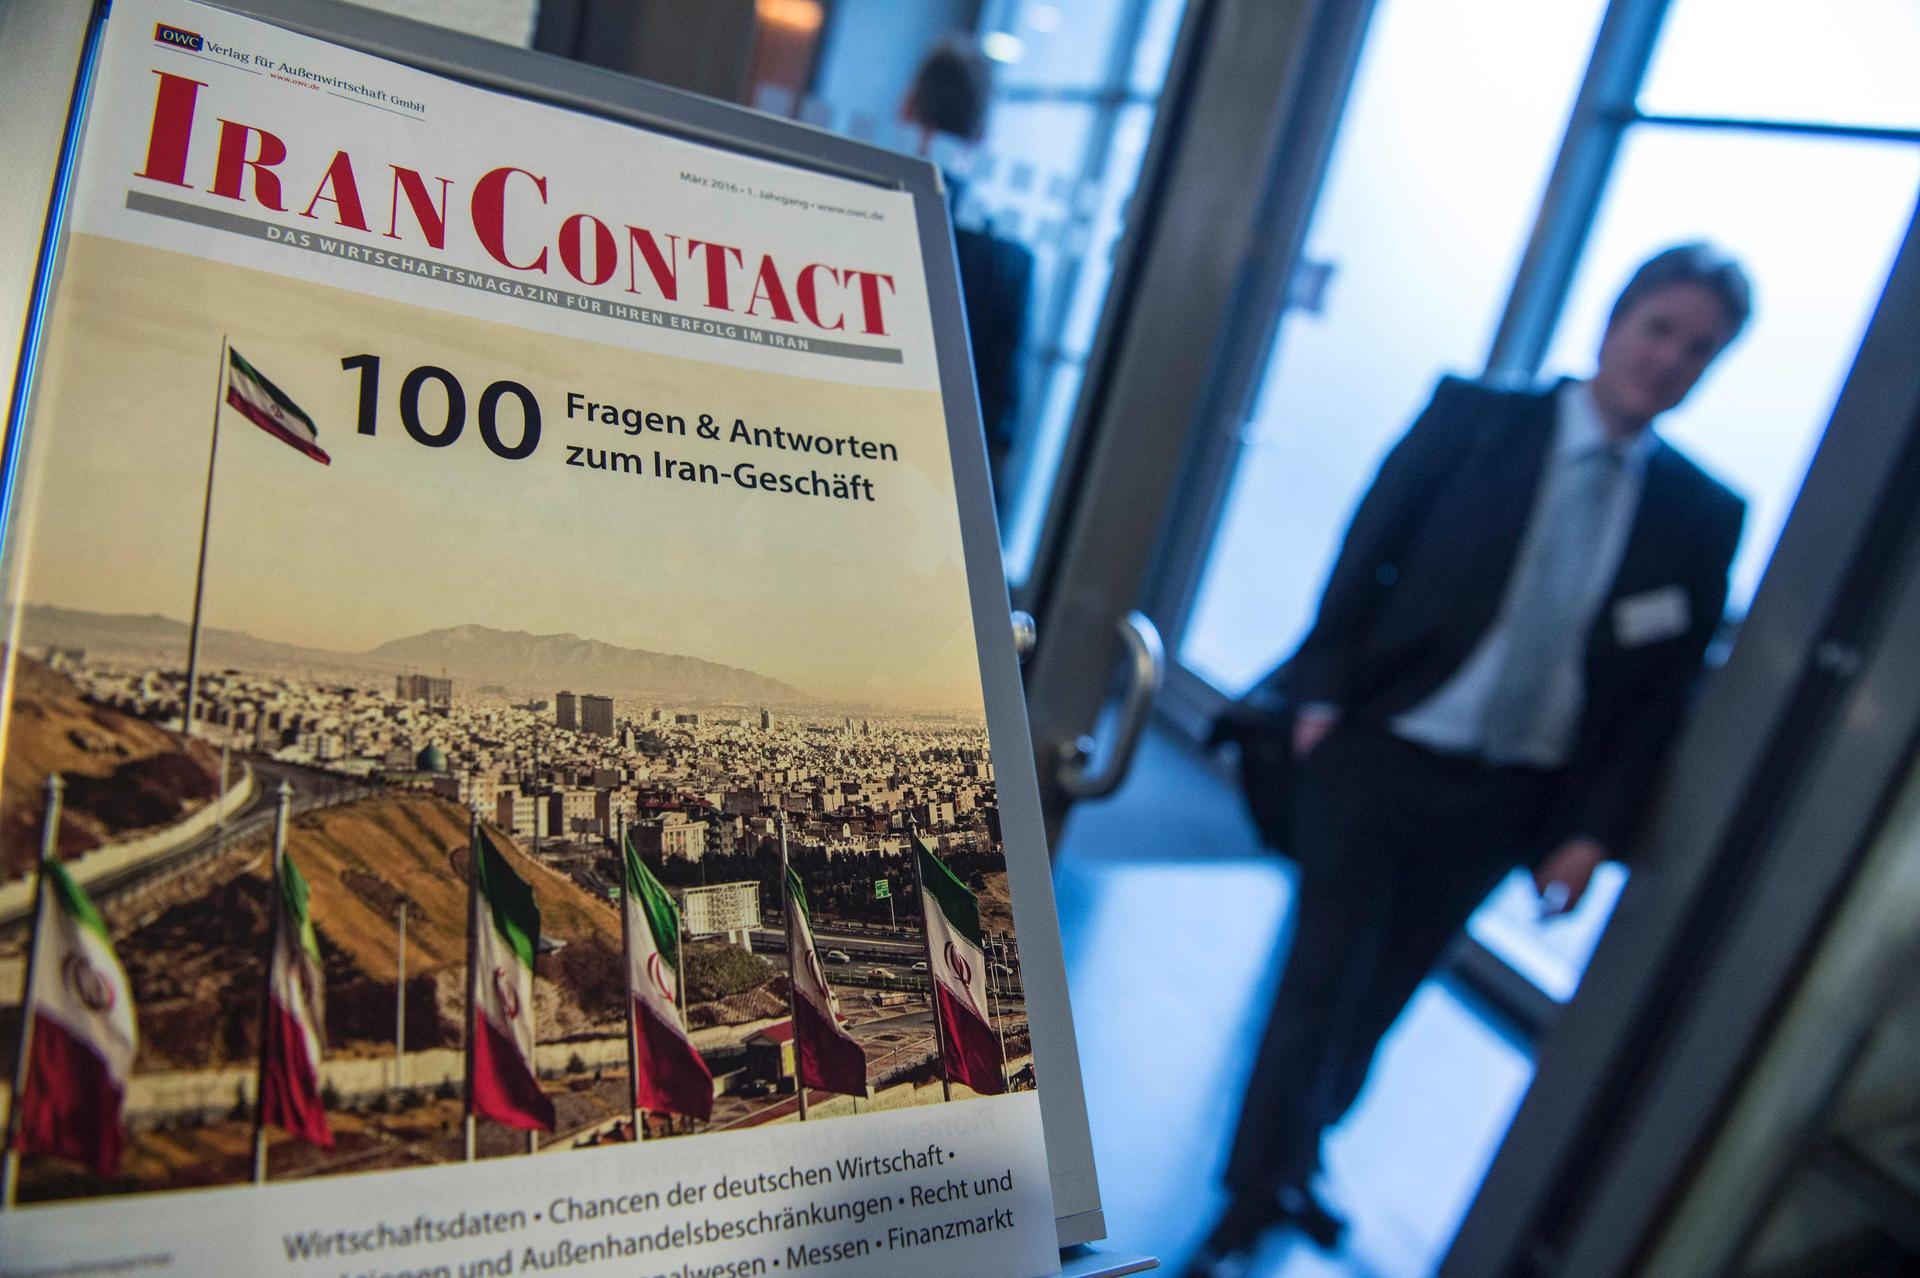 A brochure answering questions on investment in Iran is seen at the German-Iranian Business Forum in Berlin on March 3, 2016. / AFP / John MACDOUGALL